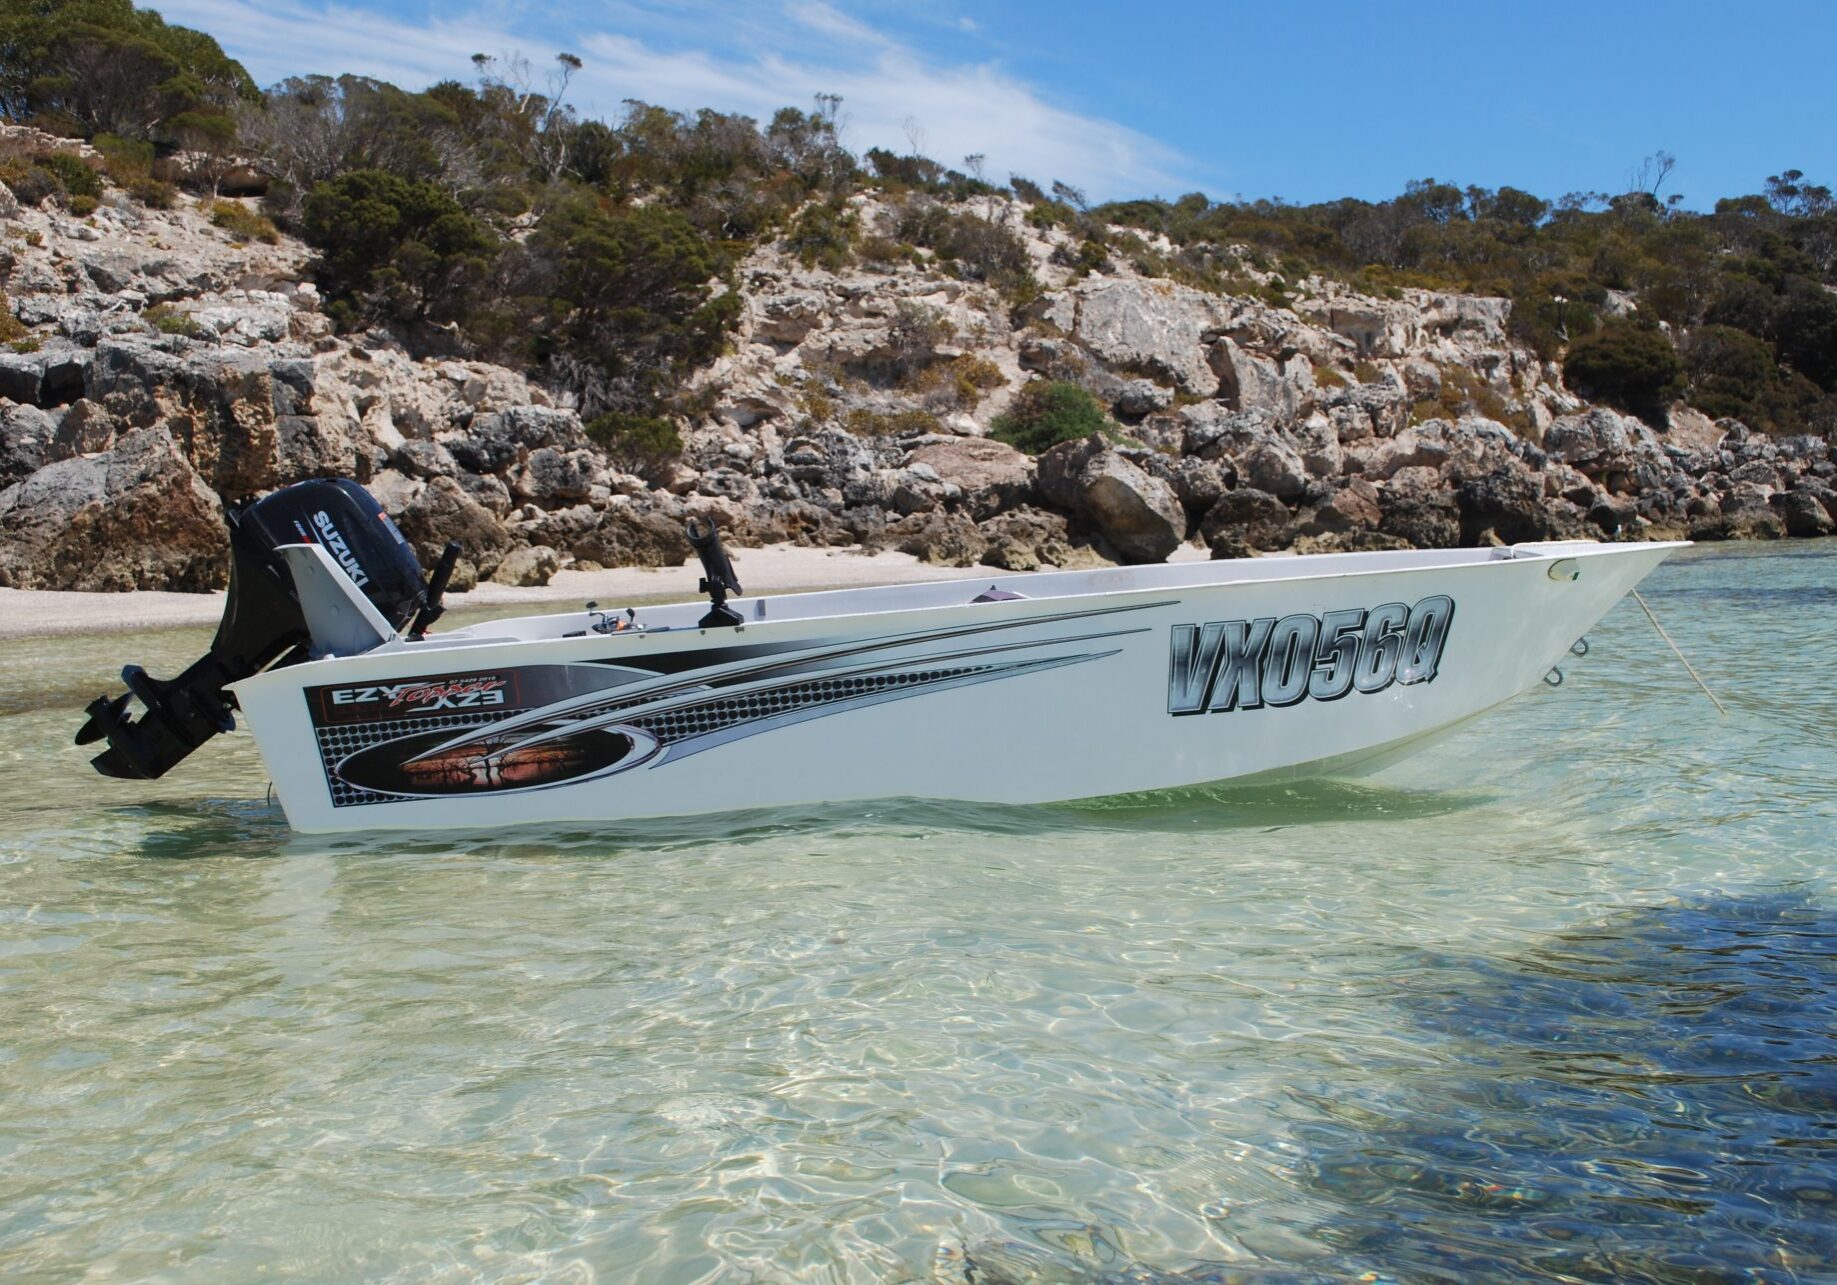 “Fishin’ Ezy” at anchor – note the clean lines and extreme buoyancy – Coffin Bay SA